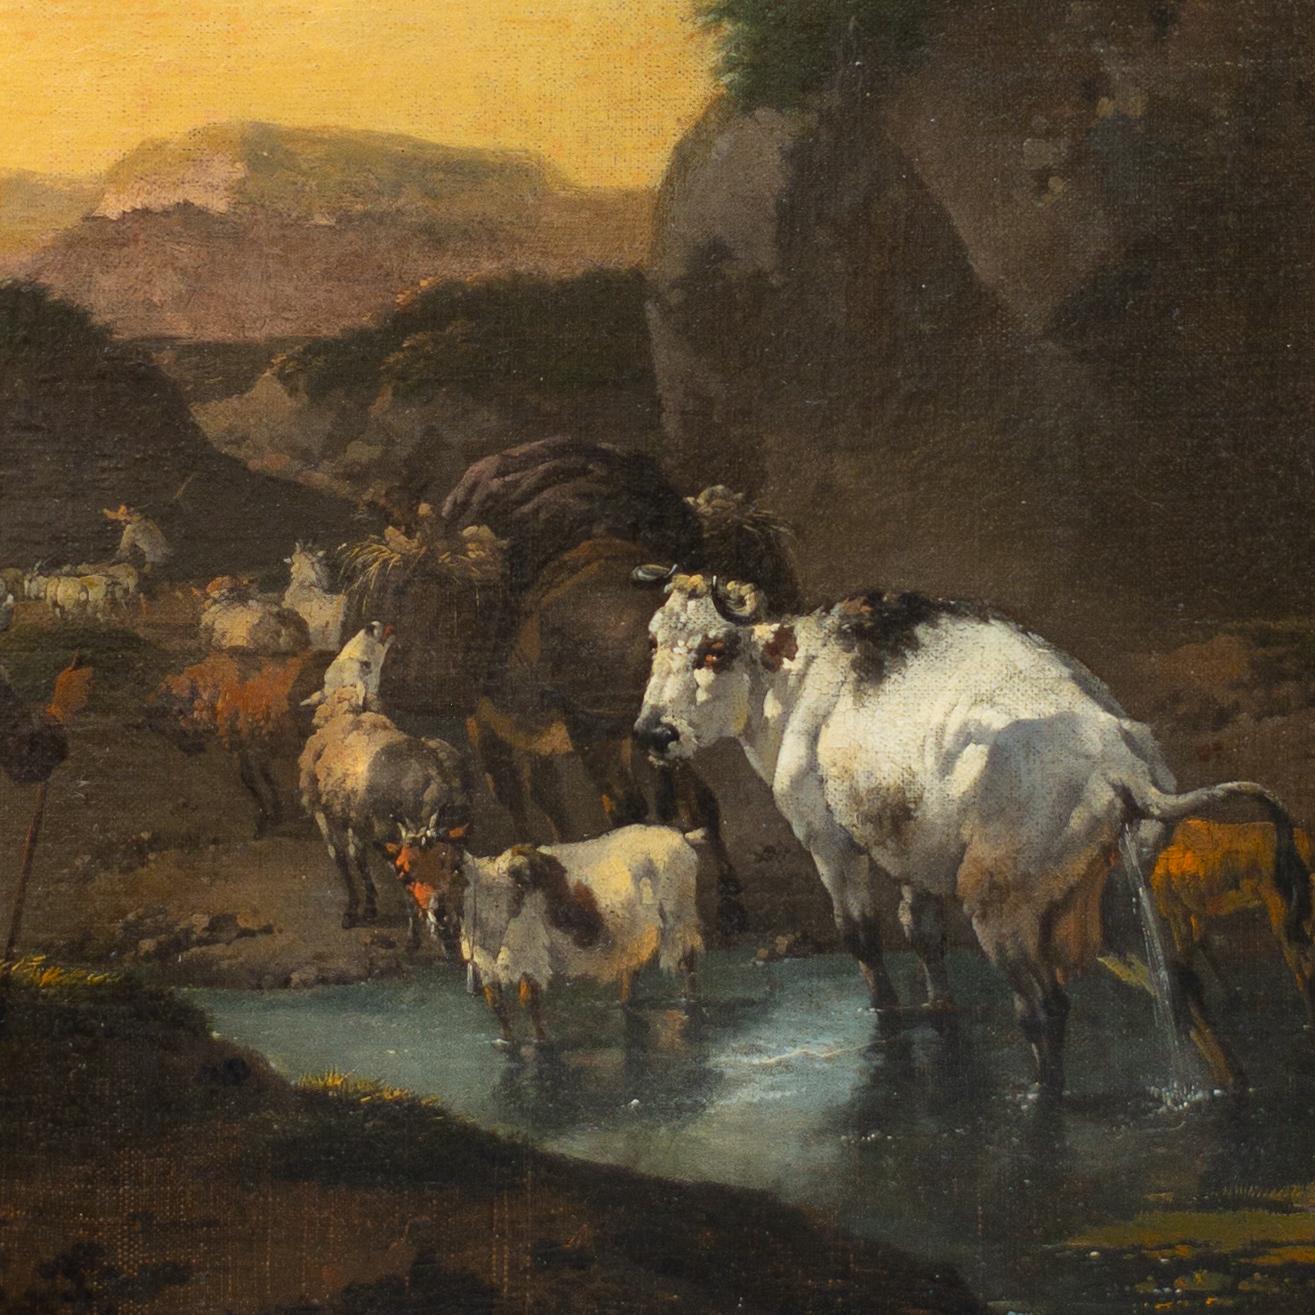 Shepherd with Sheep, Cows and a Goat in a Landscape by Jan Frans Soolmaker For Sale 1